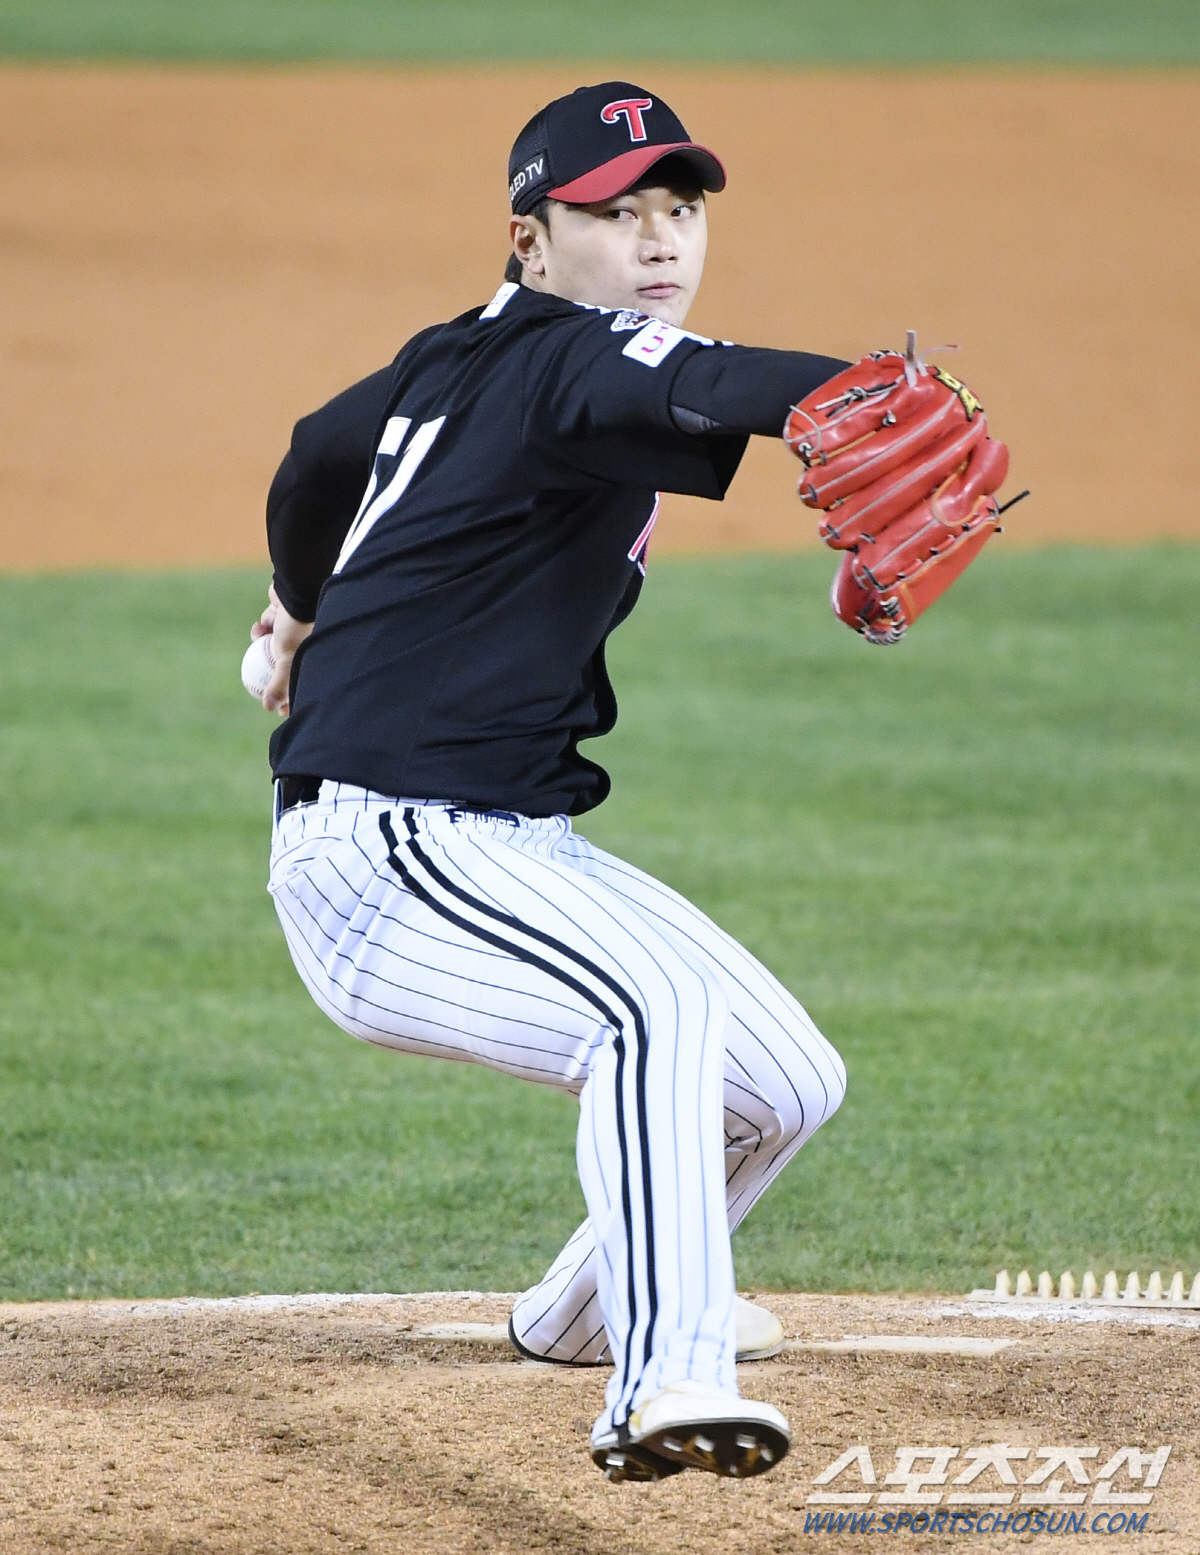 It is a clear income.The LG Twins are credited with accelerating the Mound generation replacement this year, with the young Pitchers strides.LG, who unearthed last years finalist Go Woo-seok and set-up man Jeong Woo-yeong, confirmed the growth potential of starter Pitcher Lee Min-ho and all-weather left-hander Kim Yun-stock this season.Lee Min-ho and Kim Yun-stock are newcomers who graduated from high school this year and joined.The two players made their postseason debut side by side, in the first game of the semi-playoff against the Doosan Bears at Jamsil-dong Stadium on the 4th.LG put Lee Min-ho as the starting pitcher on the day.It is unusual to have a high school graduate in the first game, which is considered to be the most important Kyonggi in the semi-PO of the three-game two-game winning system, but it was a natural choice when LGs starters were selected.Above all, I believed in Lee Min-hos position.Of course, Lee Min-ho had a good autumn baseball declaration ceremony, allowing five hits and four four sand dunes in 313 innings, allowing three runs to defeat.Although the ball was somewhat unstable, it is the evaluation of Ryu Jung-il after Kyonggi that he found a hopeful aspect.Ryu said, If I did not hit the homer in the first time, it would have been a good pitcher game. I want to express that I was the first starter of the postseason and hit the homer but saw a great possibility.Lee Min-ho showed off a heavy fastball up to 149km and a powerful slider around 140km while throwing 66 balls.He allowed a superior homer to Doosan José de San Martín Fernandez in the first inning, but he had a good 142km slider in the low-strike zone.Lee Min-ho, who has played five starts this regular season, has only failed to fill five of 16 starts.The remaining 15 Kyonggi pitched more than five innings, all of which showed potential in the inning digestive capacity, the first qualifying pick for the starter.He was only 4-4 with a lack of help from the batting line and Bullpen, but he was stable with an Earned run average of 3.69 and a hit rate of 2.4.49.The Earned run average is 2.80, except for the Lotte Mart Giants, who have allowed 10 runs in 113 innings on September 7.It is a figure that shows the qualities to grow into the next generation ace.Kim Yun-stock made his way to the bottom of the eighth inning, trailing 0-4, and cooked three batters lightly in one inning.Although the game was in a situation, Doosan Park Se-hyuk Kim Jae-ho threw nine balls and handled them with first baseman ground ball and center fielder fly ball.Kim Yun-stock made his way to 23 Kyonggi, going between regular-season starts and Bullpen.Kim Yun-stock, who has 2 wins, 4 losses, 2 holds and Earned run average 6.25, is not a key member in the selection and Bullpen yet, but is evaluated as having laid the foundation for expanding its utilization as a left-handed Pitcher.It is a spirit that can be a force for LG Mound, no matter which position of starter, long relief, left-handed specialist, set-up man.It has a variety of fastballs, curves, pitches, changeup, sliders, etc. in the mid 140km range, and it is expected that it will grow scary if it complements the power of the ball like Lee Min-ho.